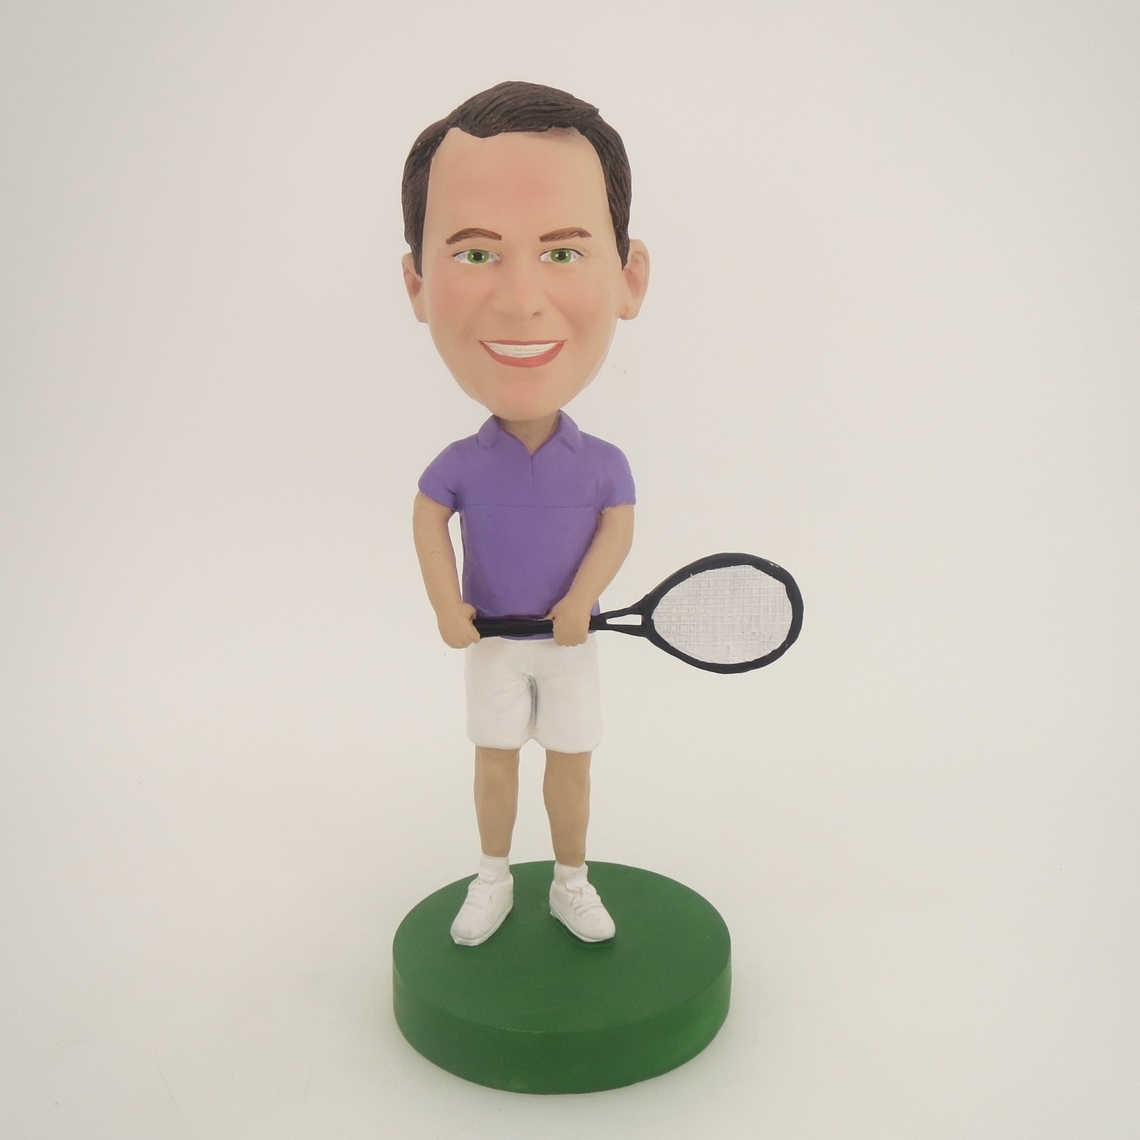 Picture of Custom Bobblehead Doll: Man Playing Tennis